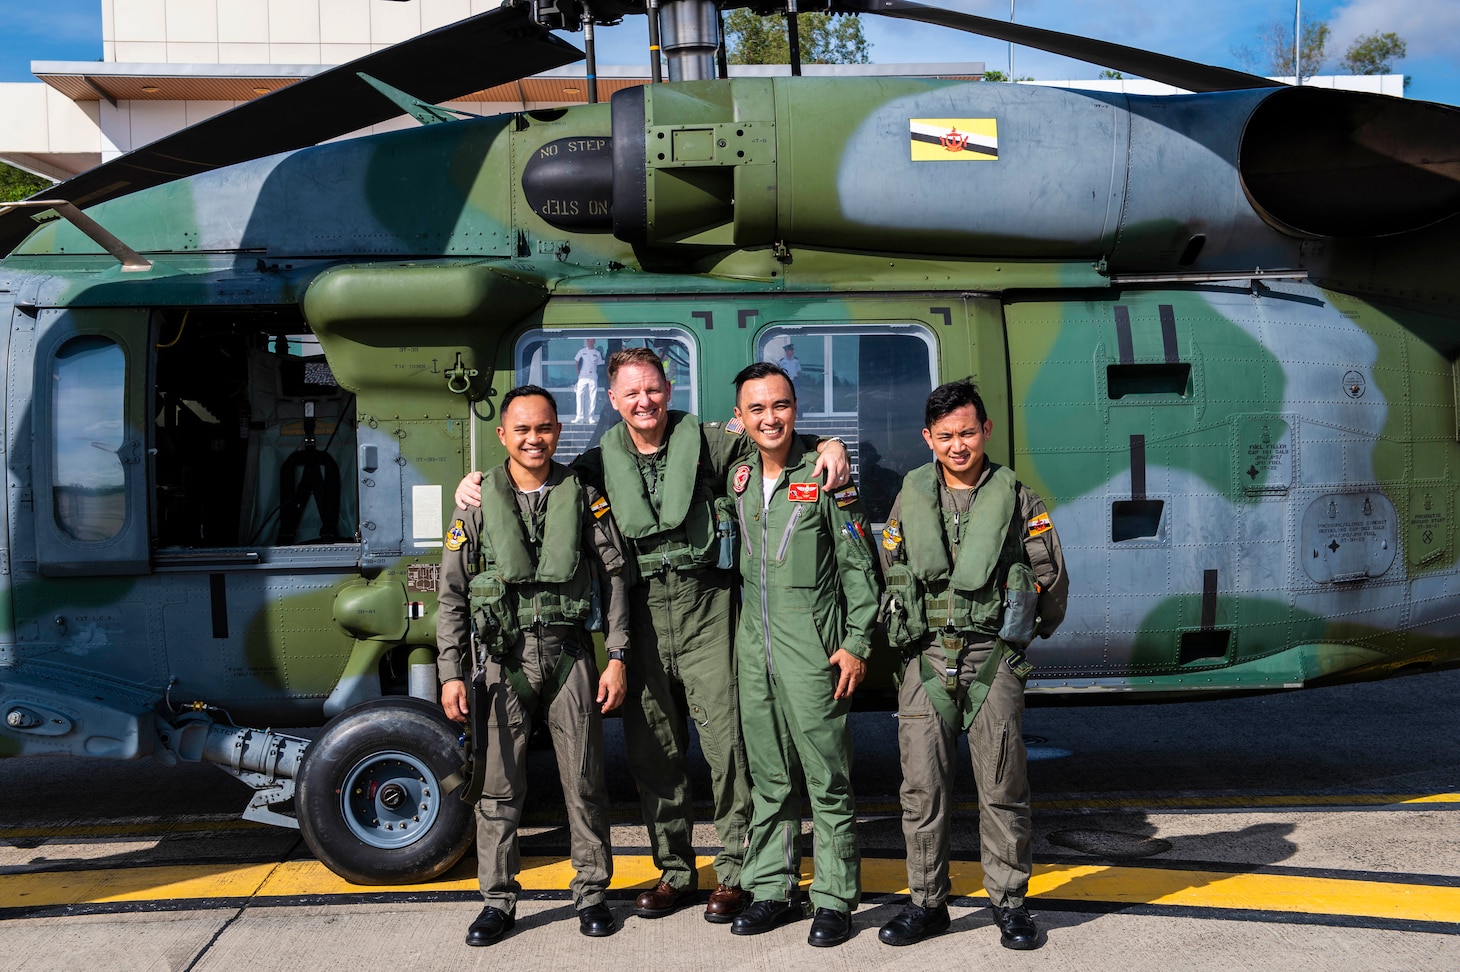 RIMBA AIR BASE, Brunei (Oct. 22, 2019) Royal Brunei Air Force (RPAirF) Lt. Col. Muhammad Walee Bin Haji Roslie , U.S. Navy Rear Adm. Joey Tynch, commander, Logistics Group Western Pacific, Cpl. Awangku Khairul Azmi Bin Pengiran Haji Ali Harun, and Sgt. Khairul Hazmi Bin Haji Abdul Razak pose in front of an S-70i Black Hawk helicopter following a bilateral flight in support of Cooperation Afloat Readiness and Training (CARAT) Brunei. This year marks the 25th iteration of CARAT, a multinational exercise designed to enhance U.S. and partner navies' abilities to operate together in response to traditional and non-traditional maritime security challenges in the Indo-Pacific region.